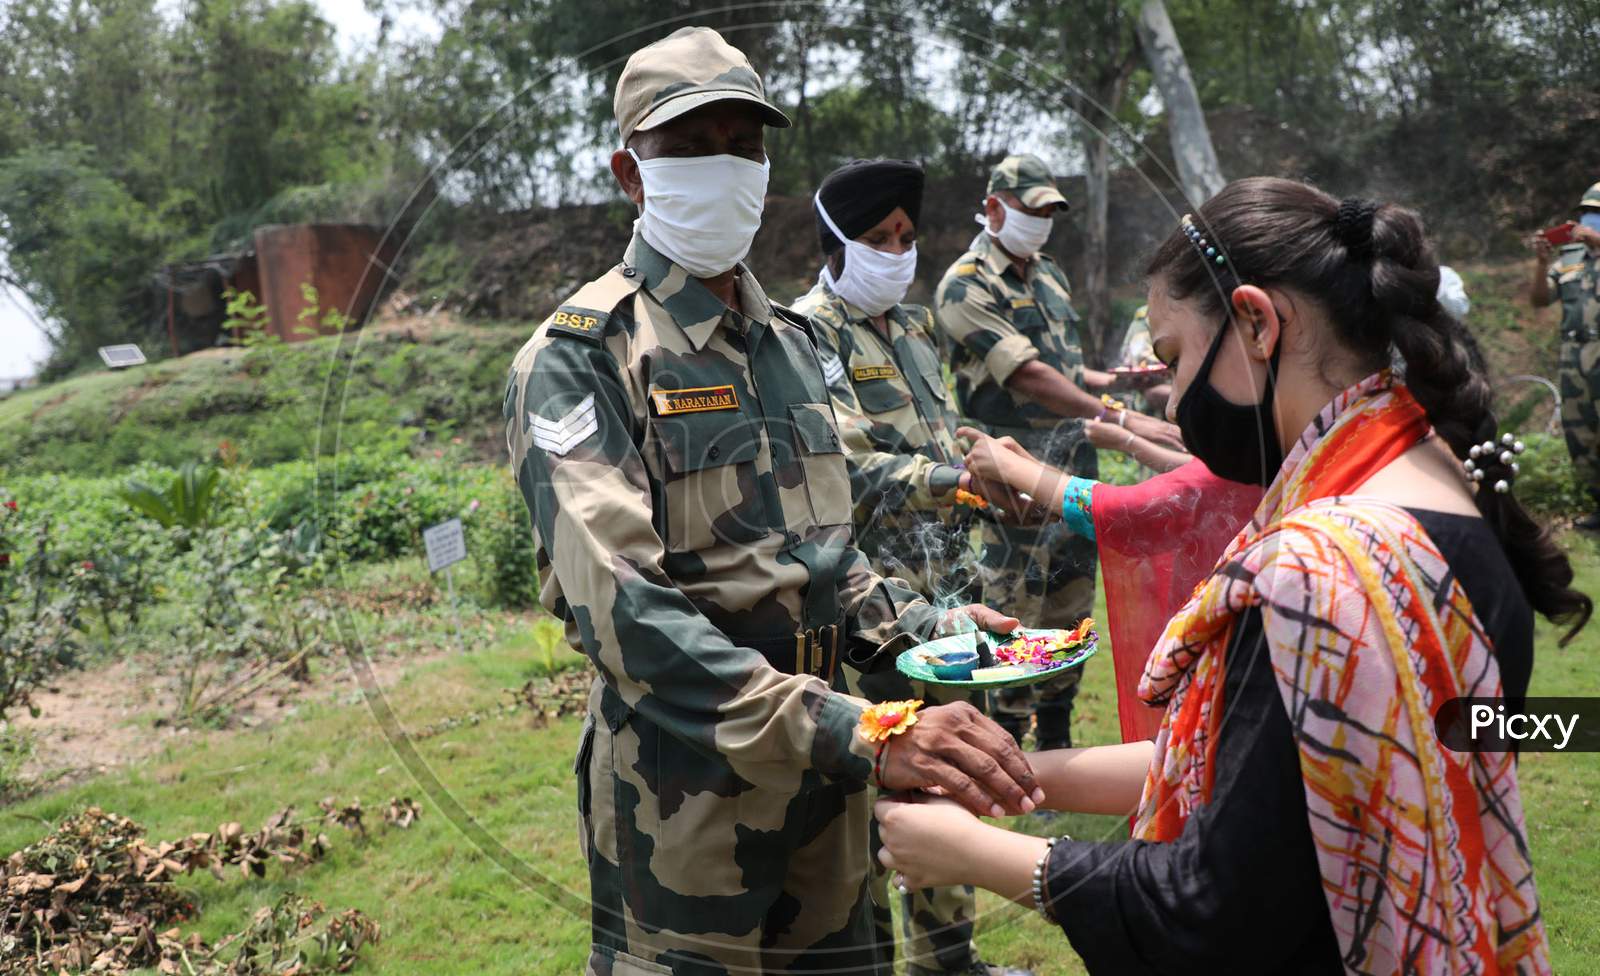 Girls tie Rakhi on the wrists of Border Security Force (BSF) personnel at the international border Octroi post in Suchetgarh, Jammu, on August 2, 2020.